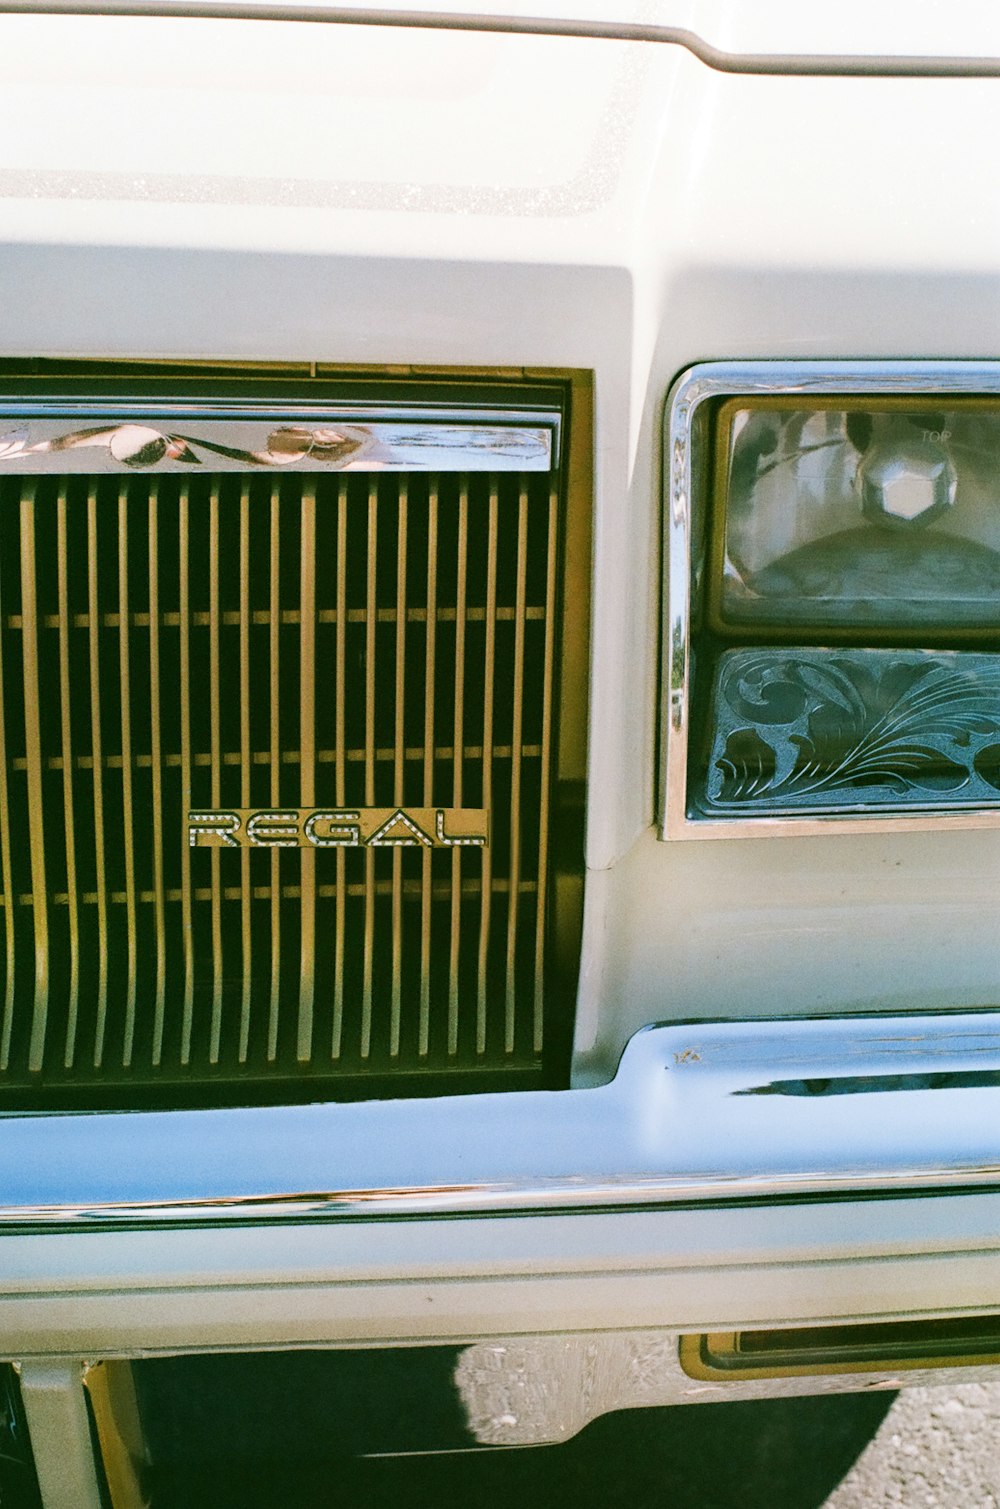 a close up of the grille of a car